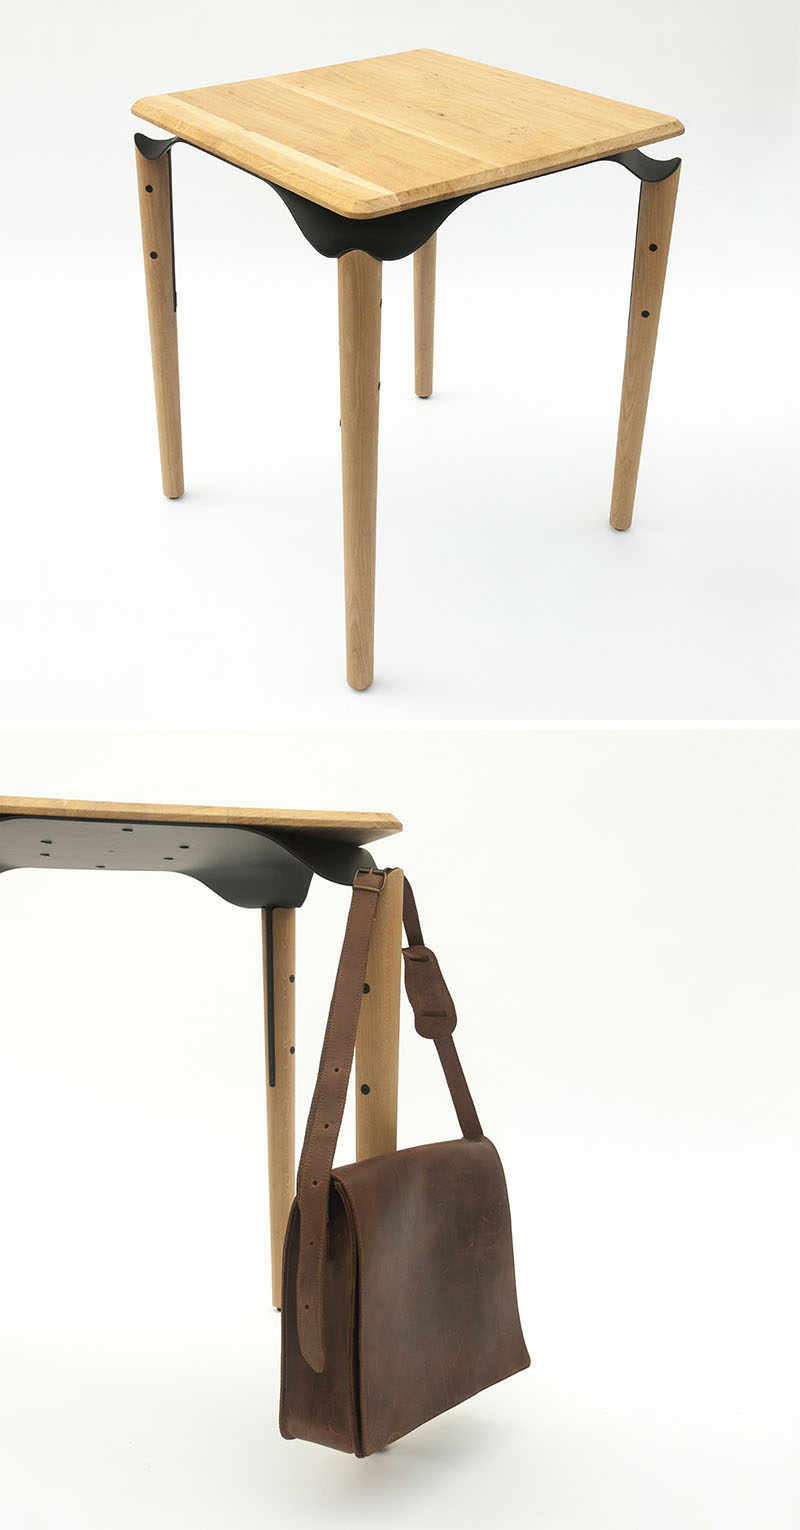 A Design Award and Competition - Furniture Design Winners